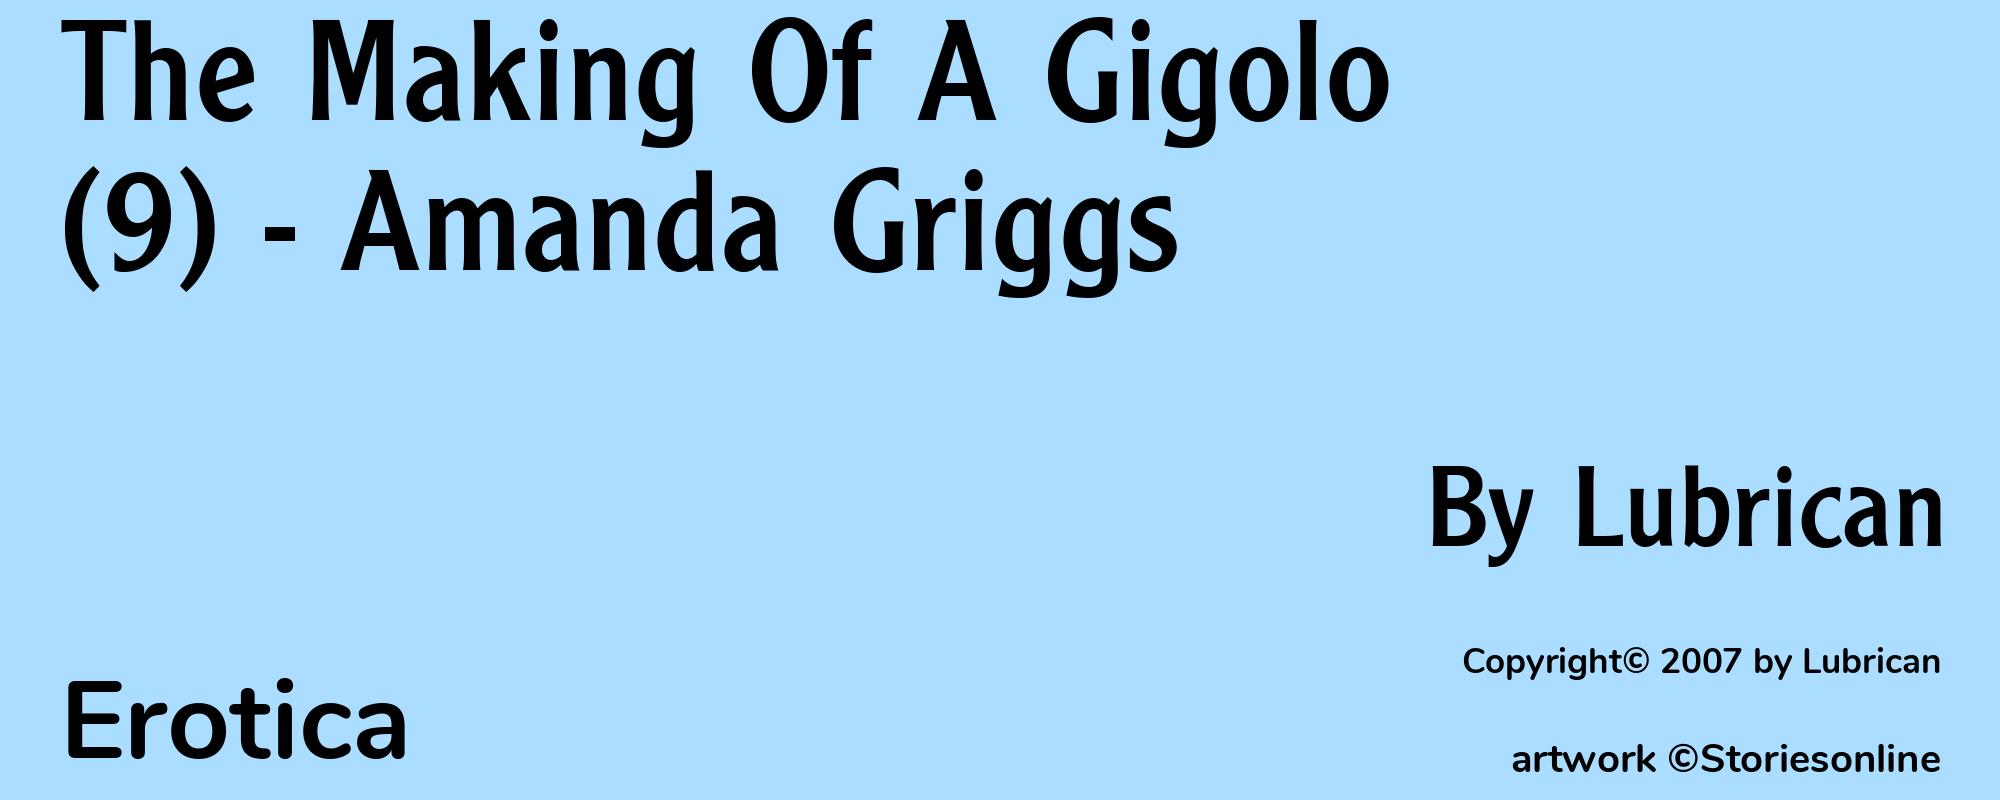 The Making Of A Gigolo (9) - Amanda Griggs - Cover